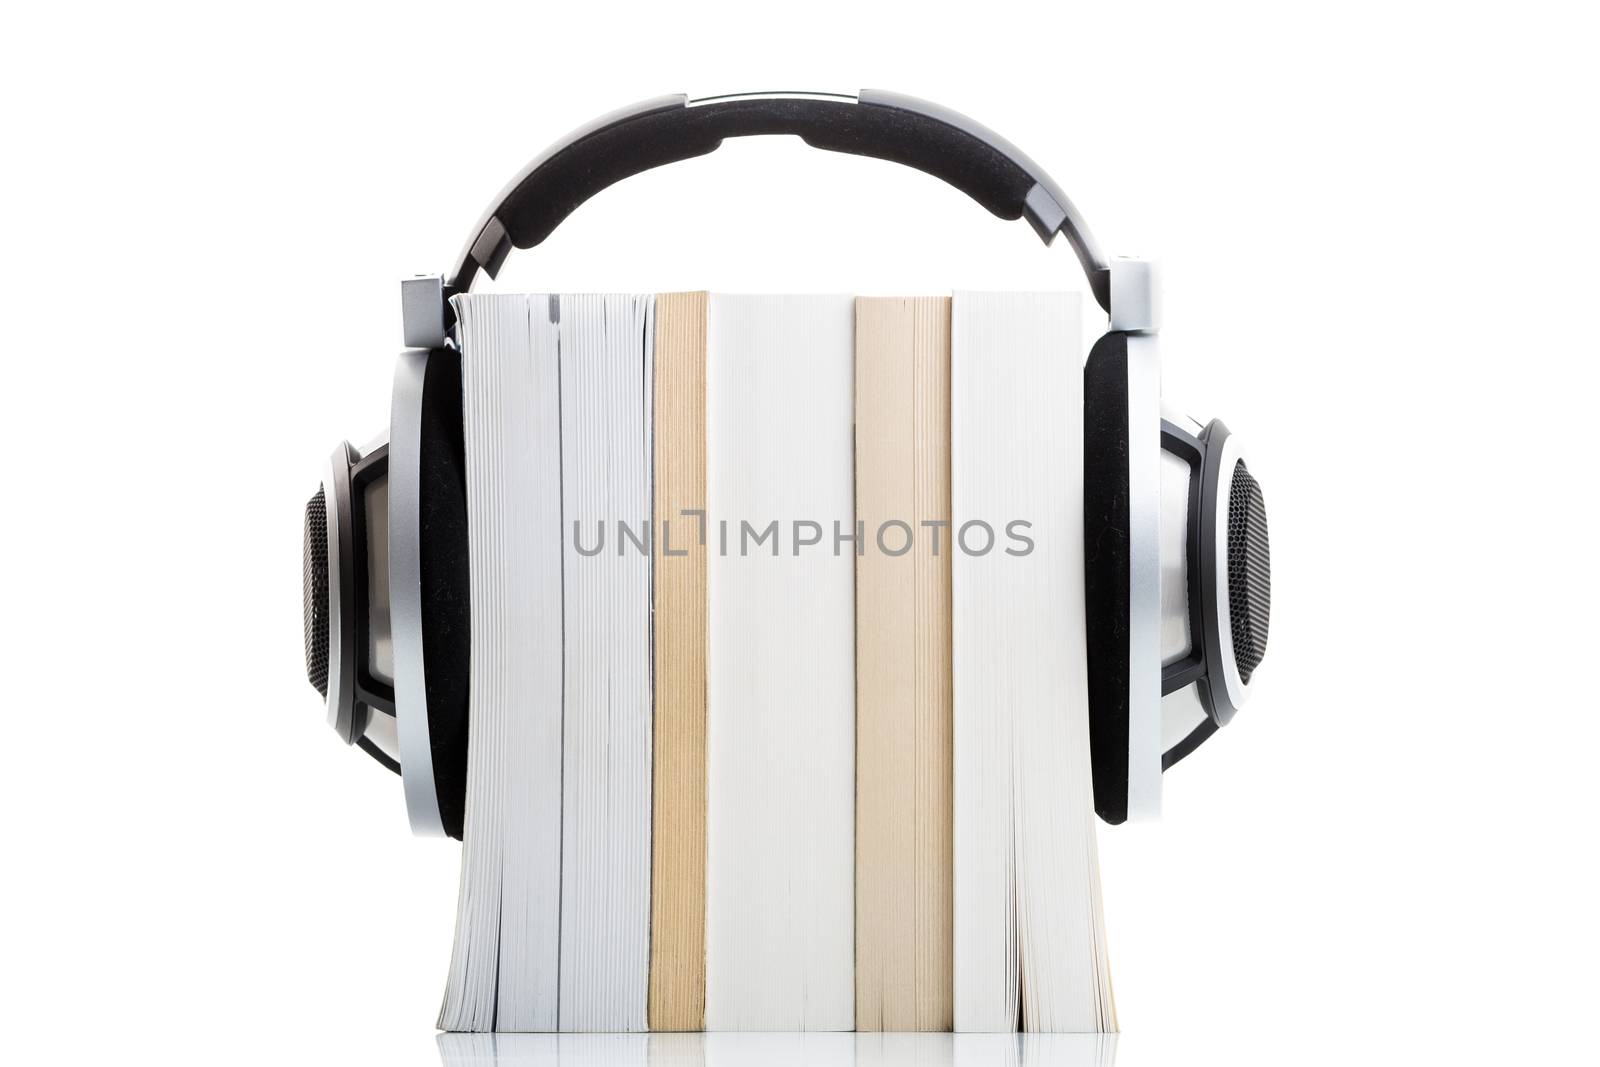 Audiobook concept - listen to your books in HD quality; hi-end hifi headphones over multiple books on white